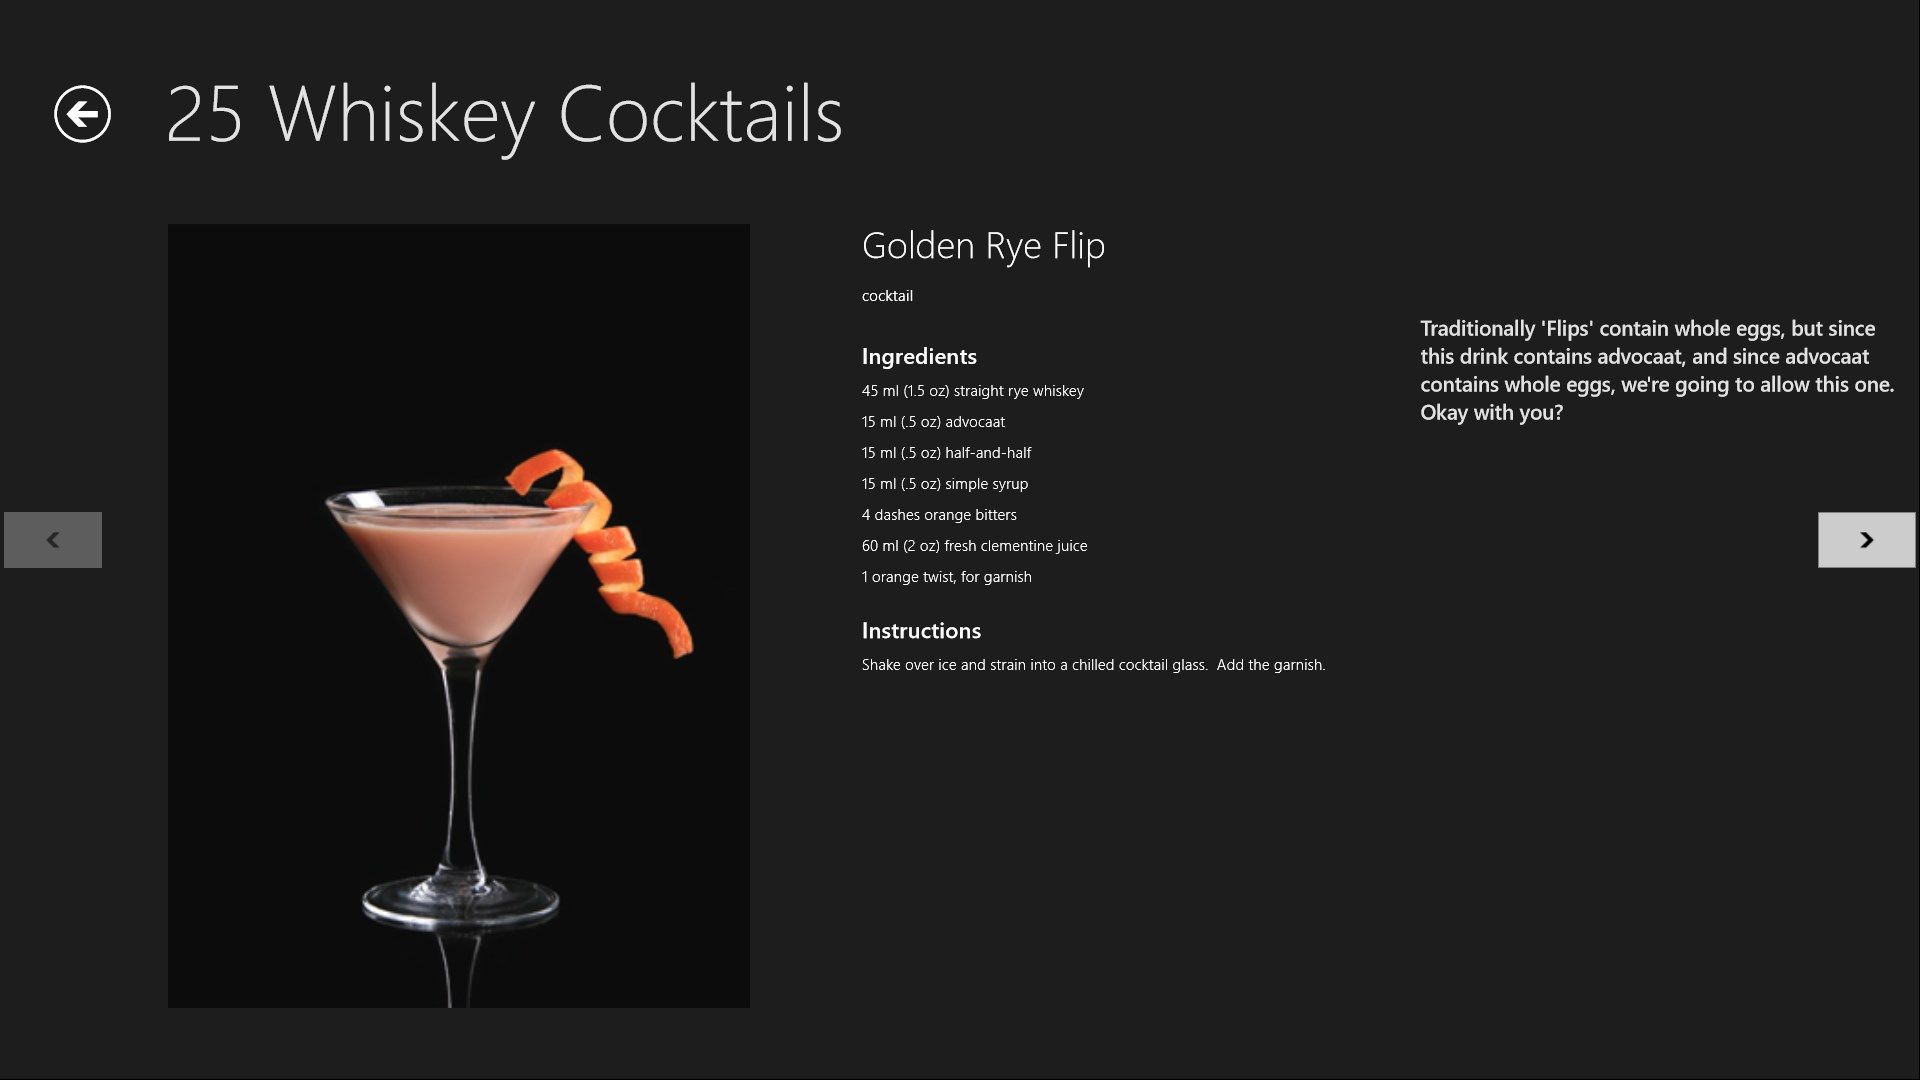 For each cocktail, view the large image, ingredients and directions